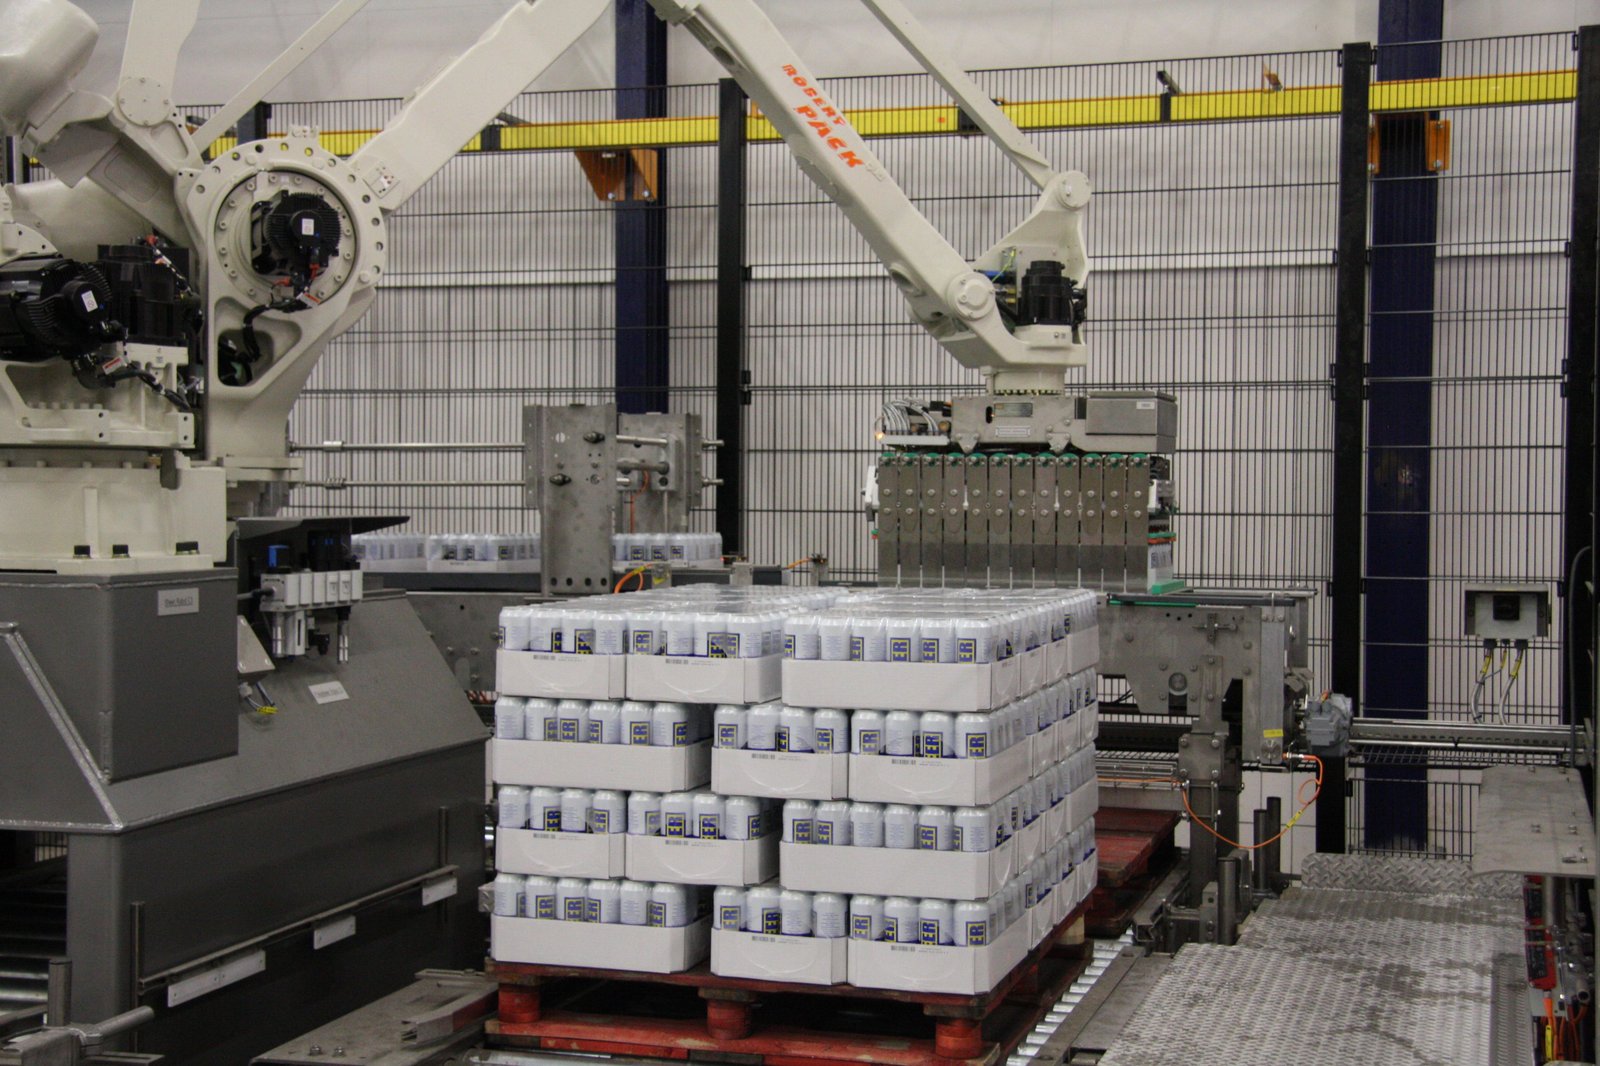 Robertpack-robot-for-palletising-cans-in-the-beverage-industry